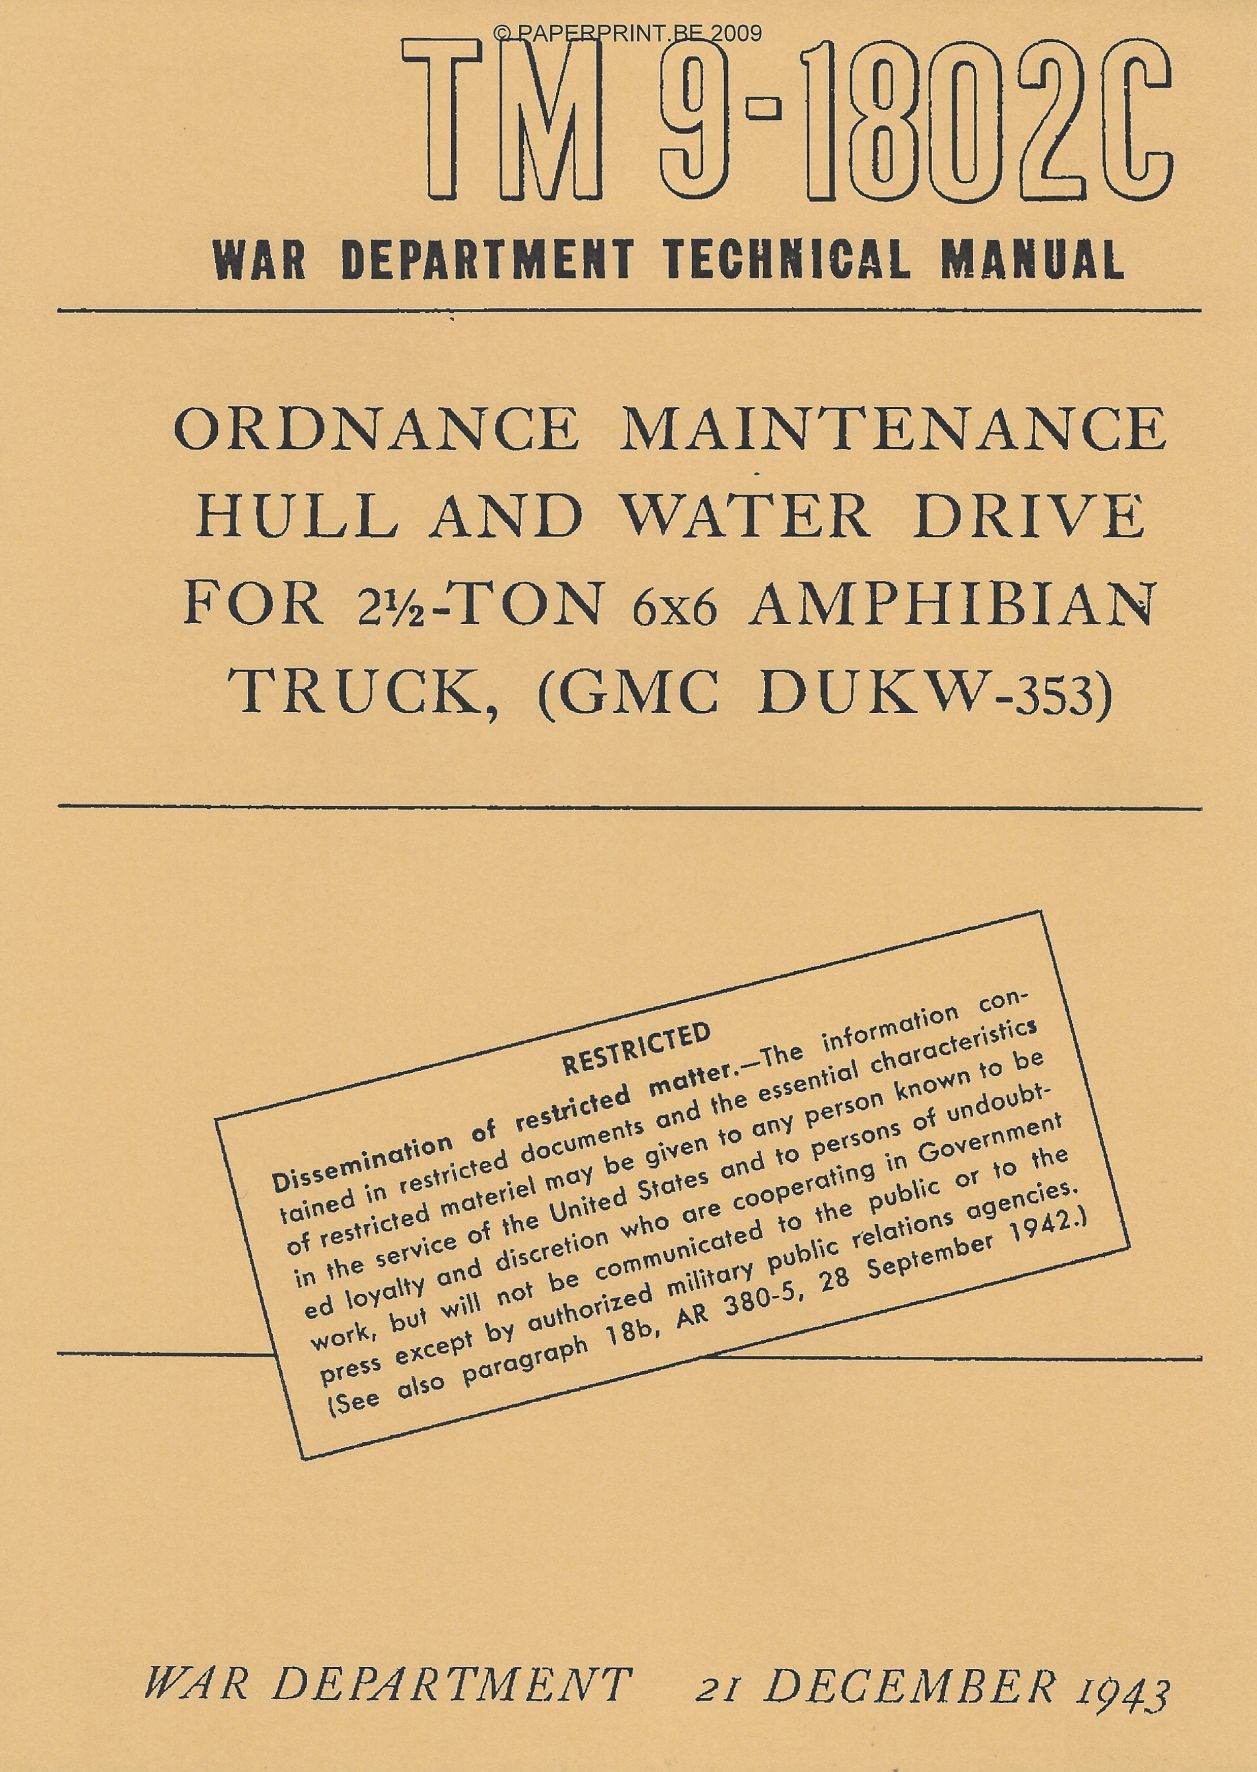 TM 9-1802C US HULL AND WATER DRIVE FOR 2 ½ - TON 6x6 AMPHIBIAN TRUCK, (GMC DUKW-353)